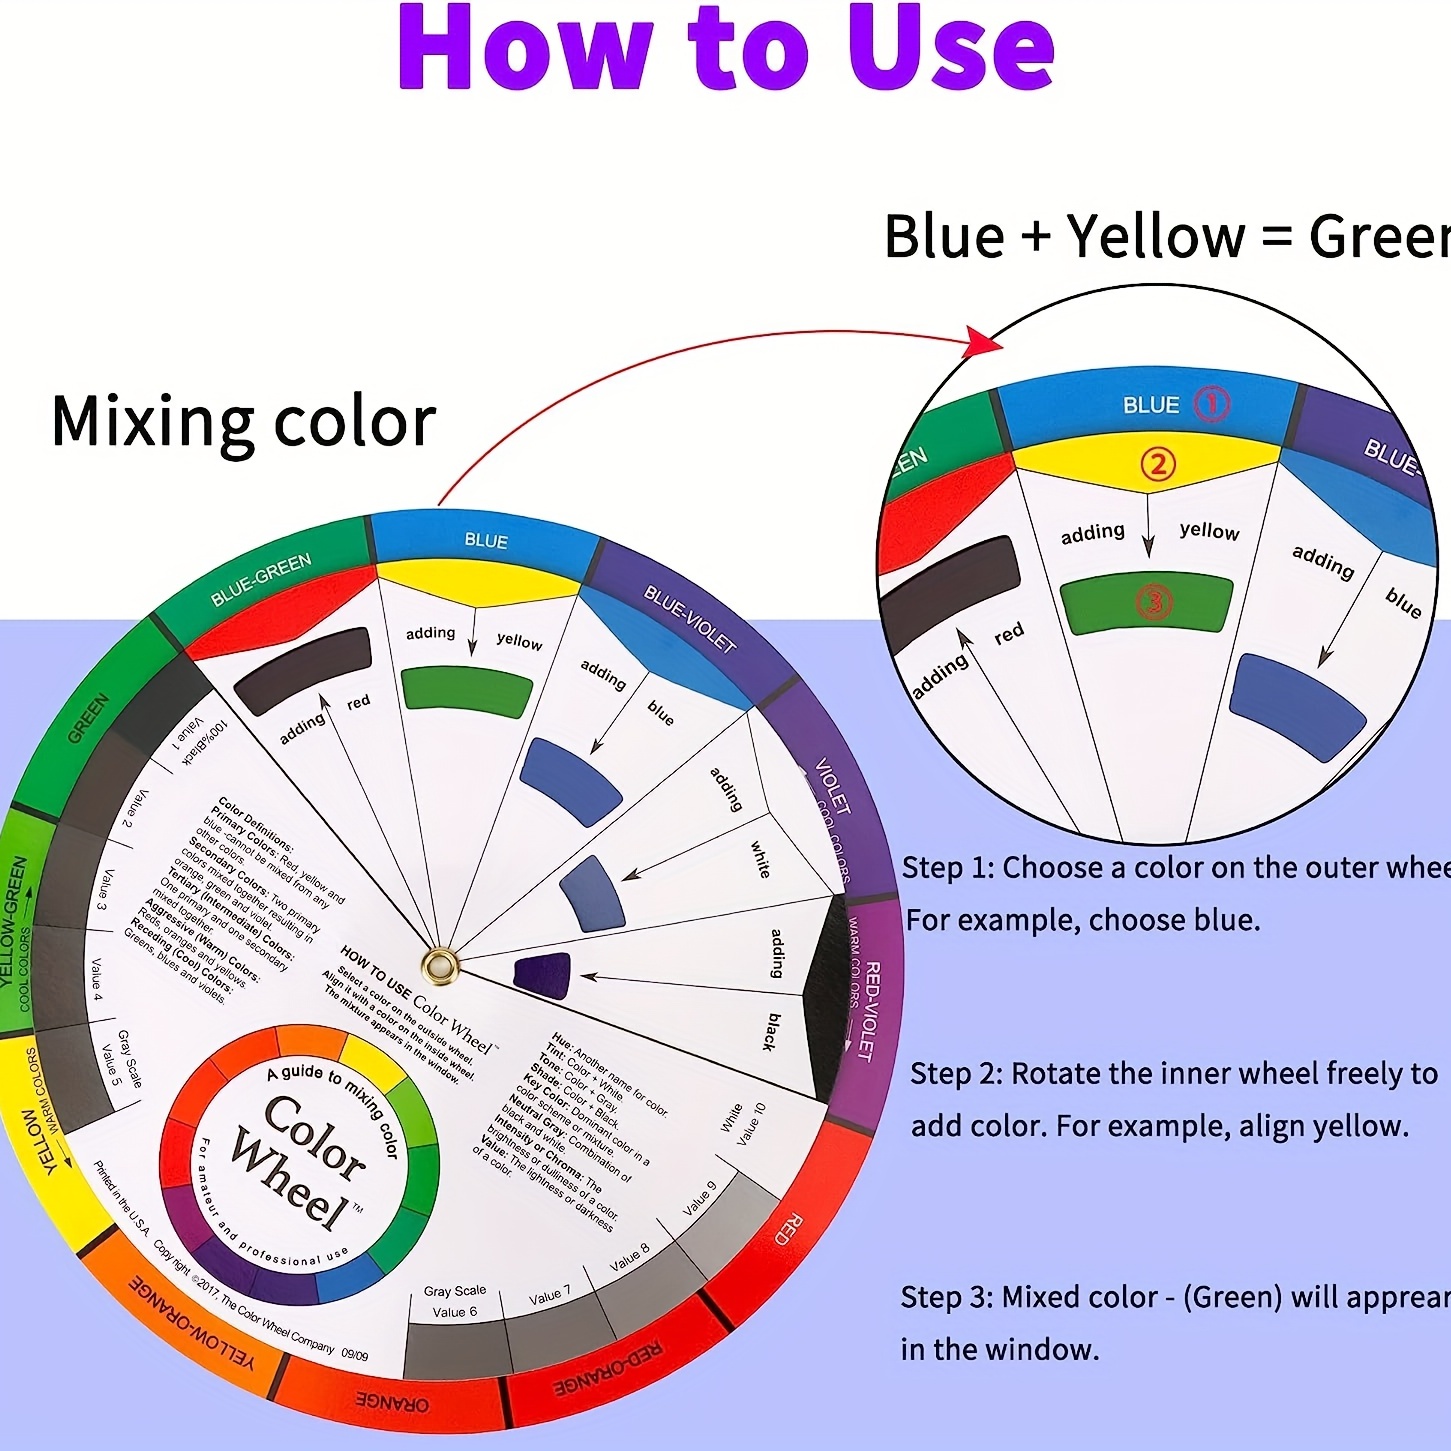 The Pocket Color Wheel - a guide to mixing colour